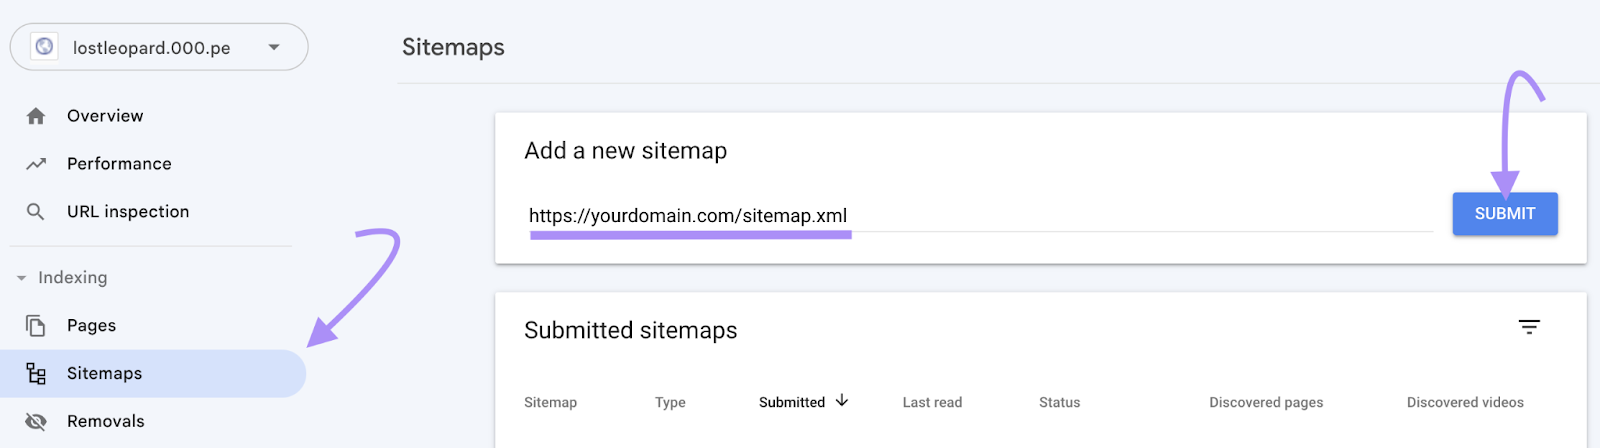 a screens،t s،wing steps to submitting a sitemap to Google